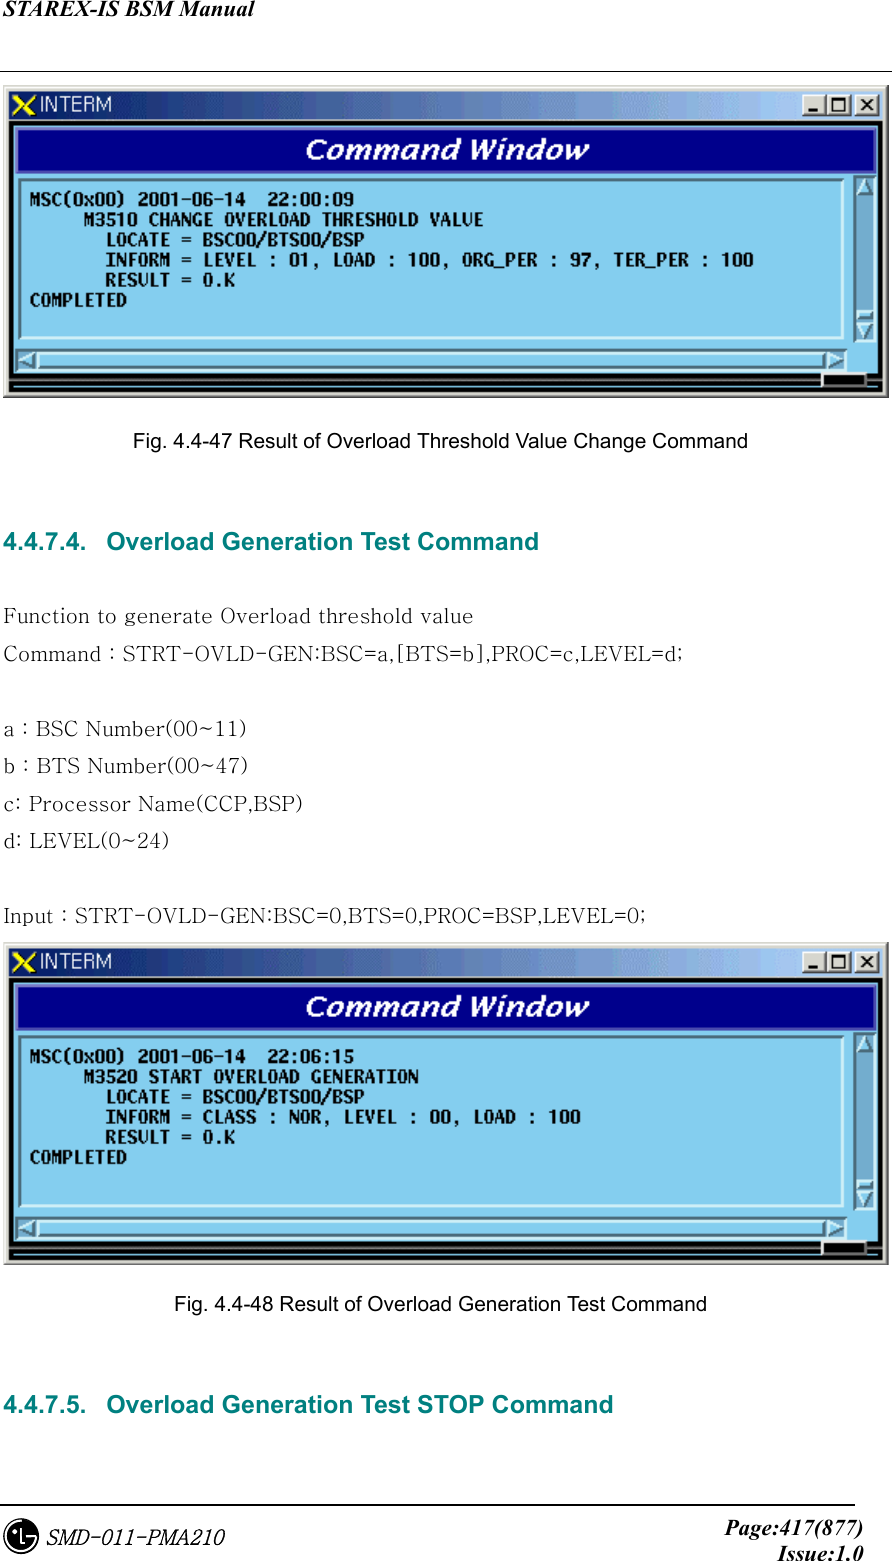 STAREX-IS BSM Manual     Page:417(877)Issue:1.0SMD-011-PMA210  Fig. 4.4-47 Result of Overload Threshold Value Change Command  4.4.7.4.   Overload Generation Test Command  Function to generate Overload threshold value Command : STRT-OVLD-GEN:BSC=a,[BTS=b],PROC=c,LEVEL=d;  a : BSC Number(00~11) b : BTS Number(00~47) c: Processor Name(CCP,BSP) d: LEVEL(0~24)  Input : STRT-OVLD-GEN:BSC=0,BTS=0,PROC=BSP,LEVEL=0;  Fig. 4.4-48 Result of Overload Generation Test Command  4.4.7.5.   Overload Generation Test STOP Command  